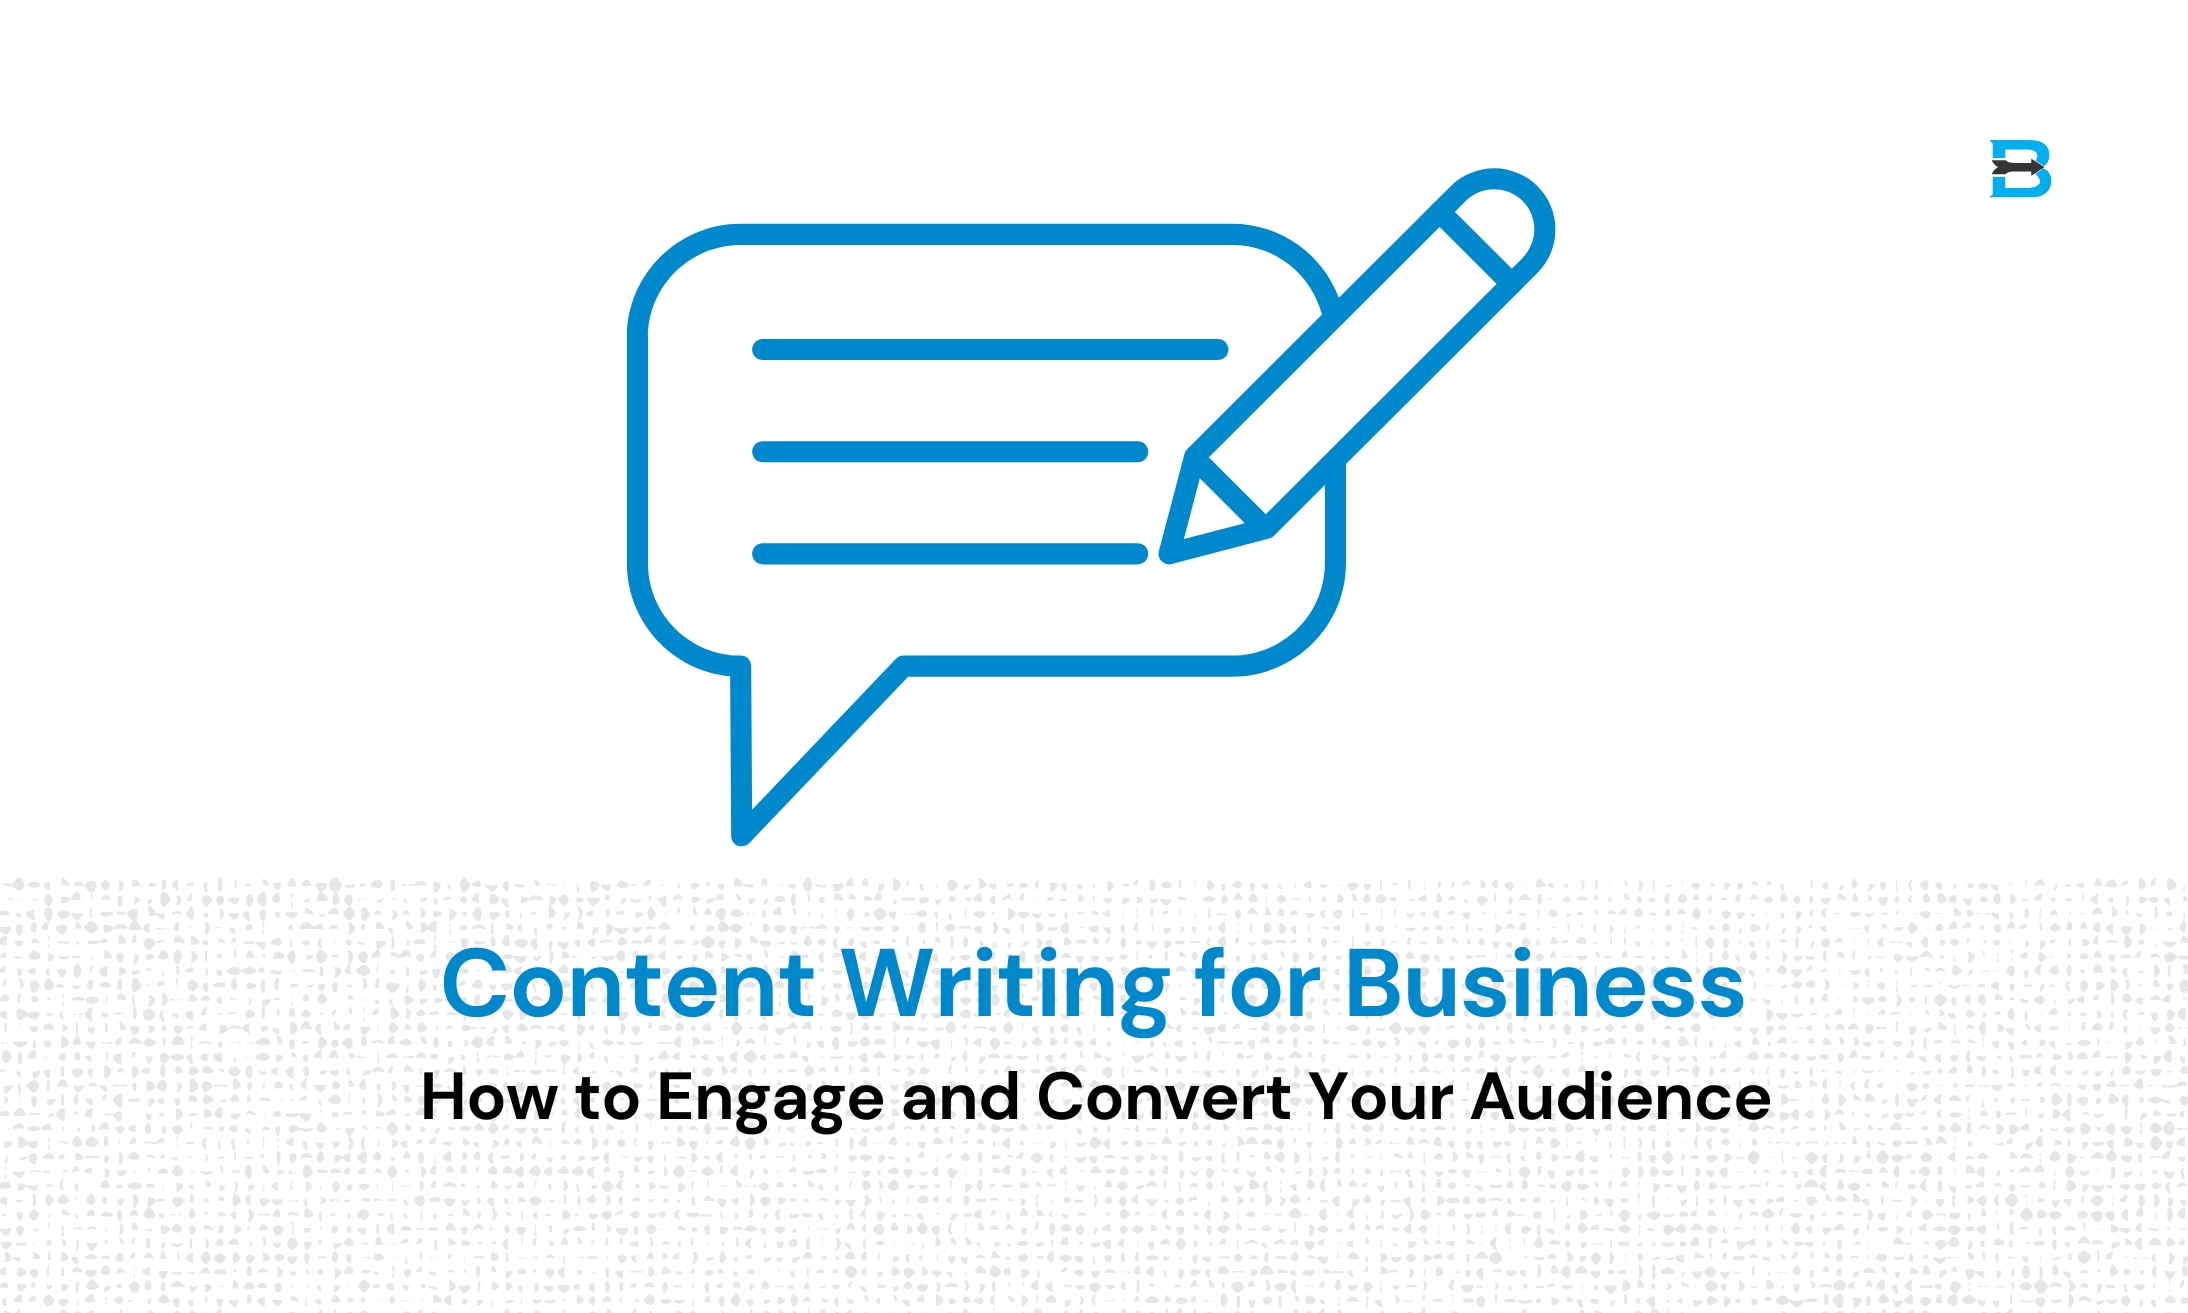 Content Writing for Business How to Engage and Convert Your Audience